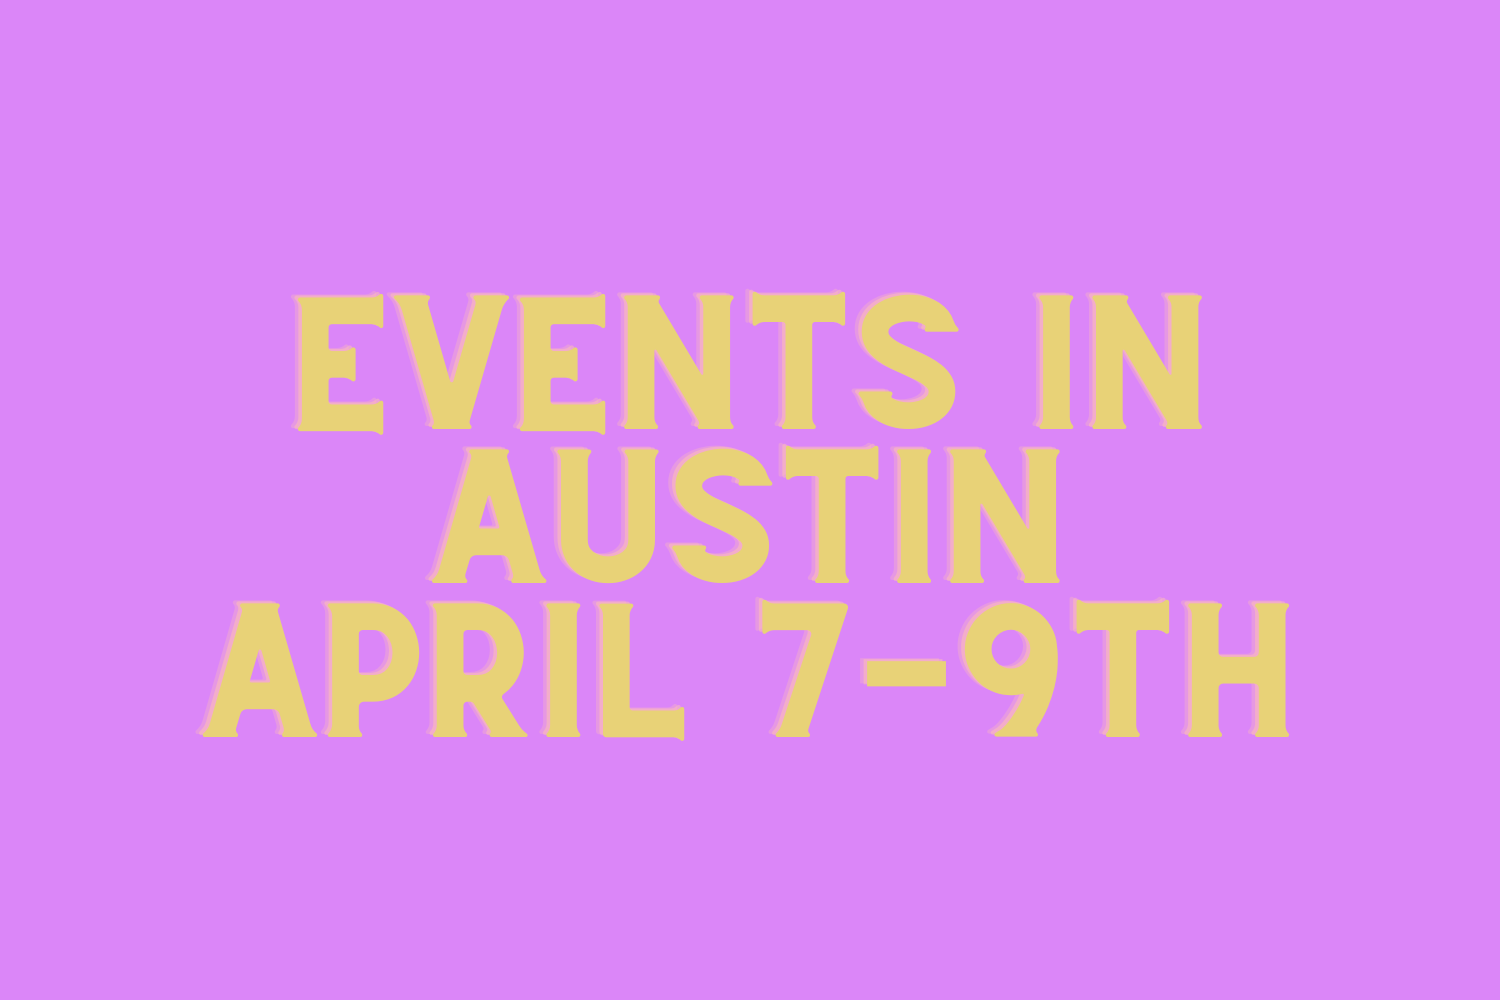 Things to do in Austin April 79th The Eagle's Eye